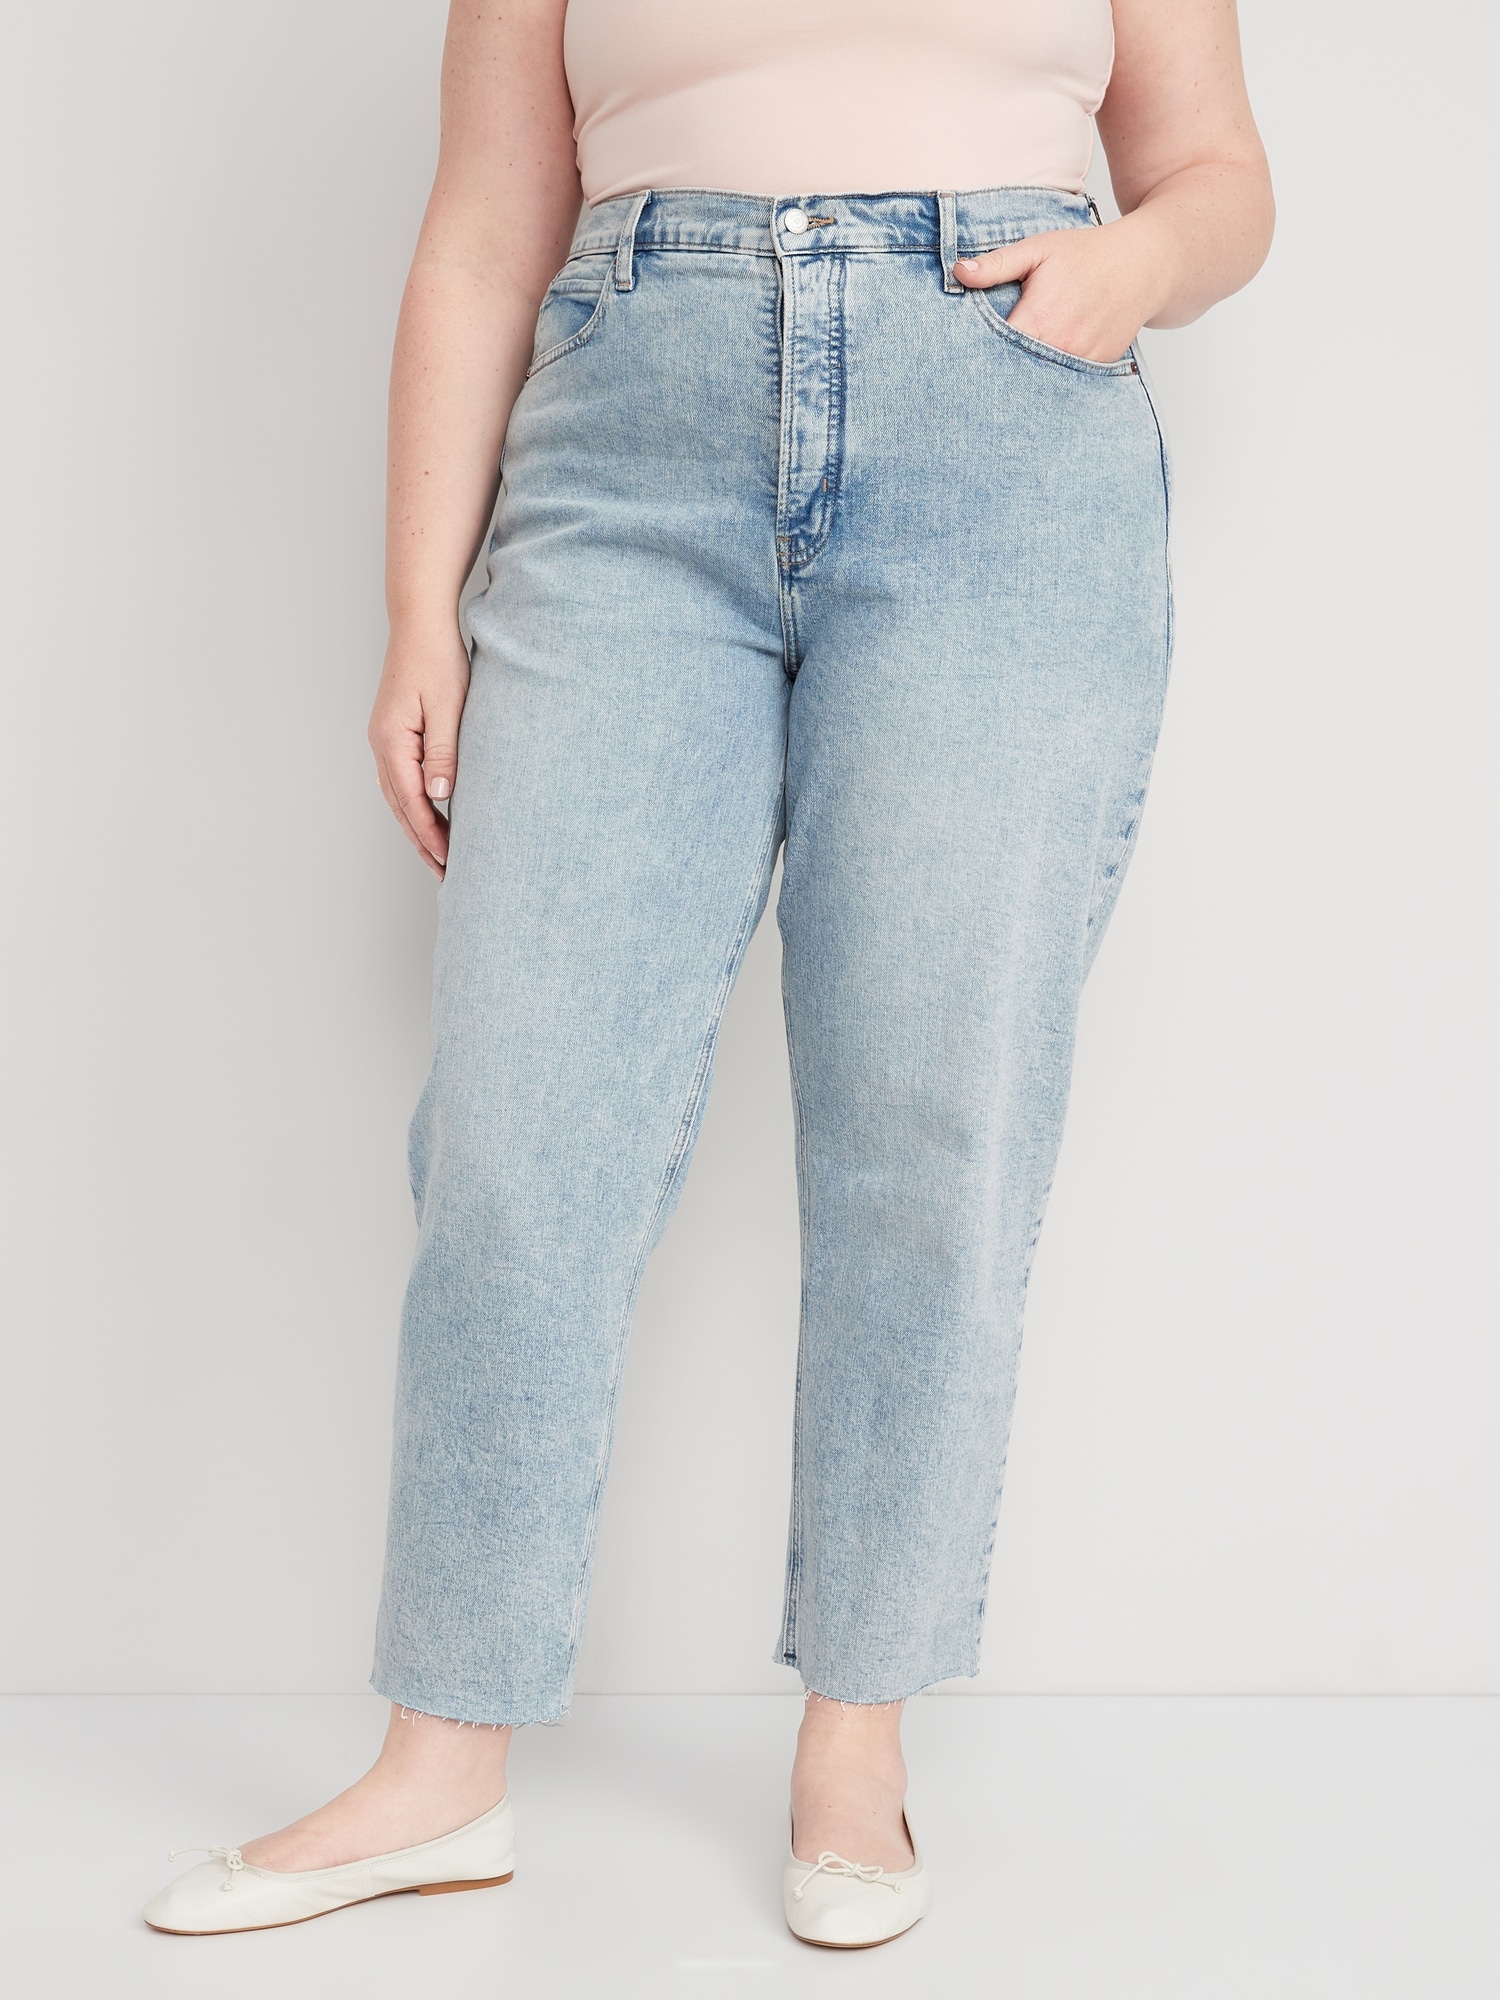 Extra High-Waisted Secret-Slim Pockets Sky-Hi Straight Plus-Size  Non-Stretch Jeans, Old Navy